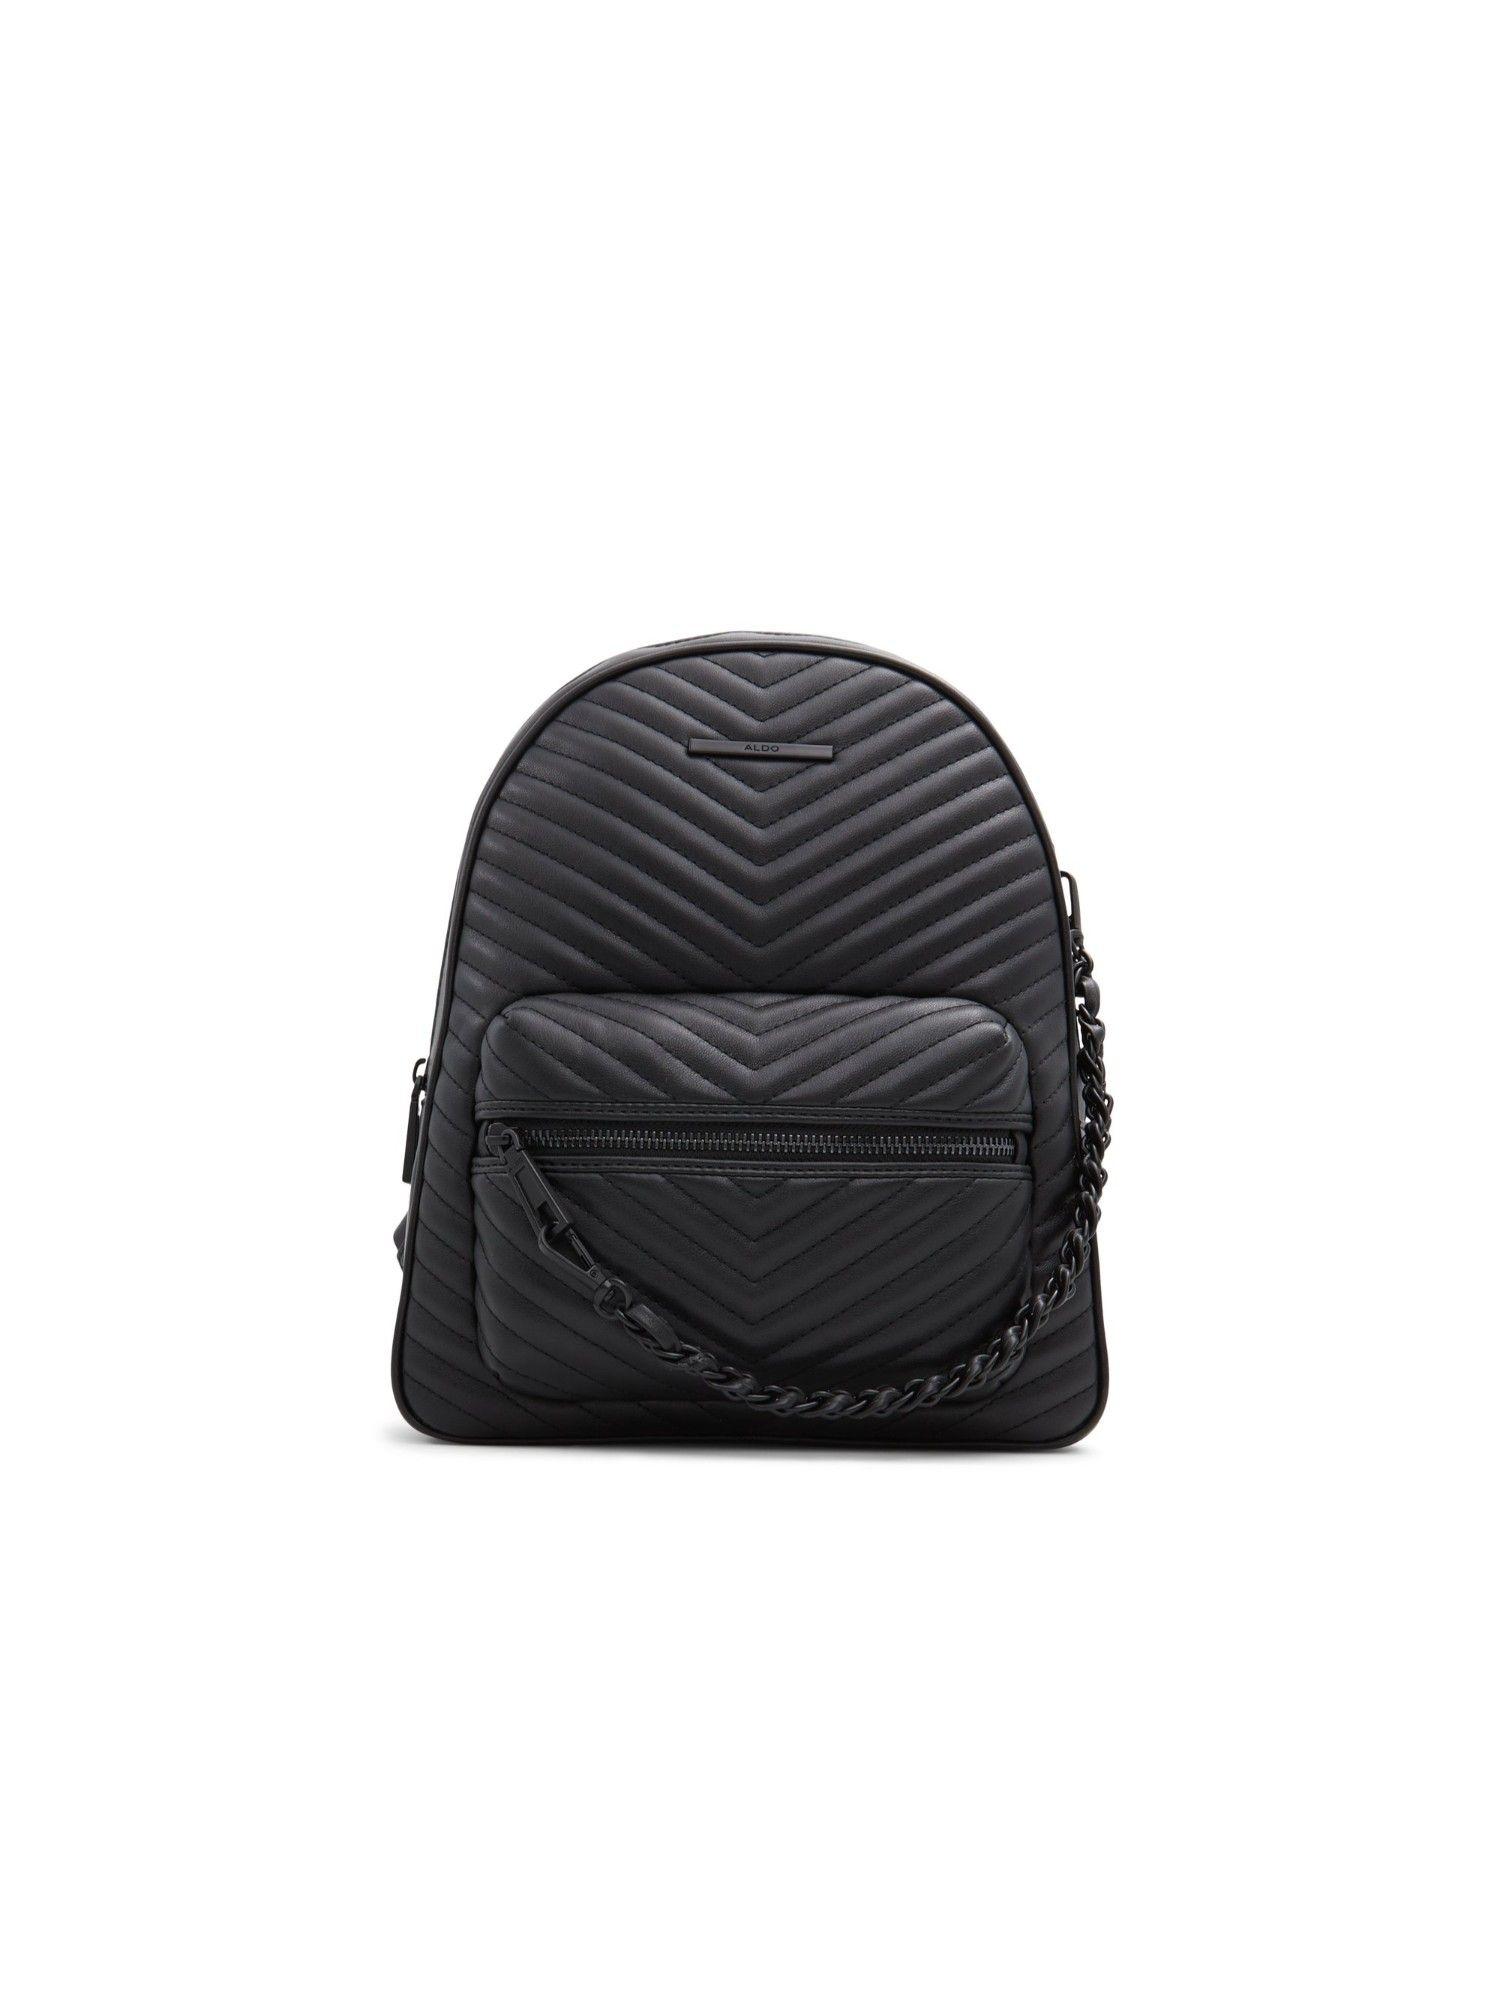 murielle women's black backpack with detachable chain